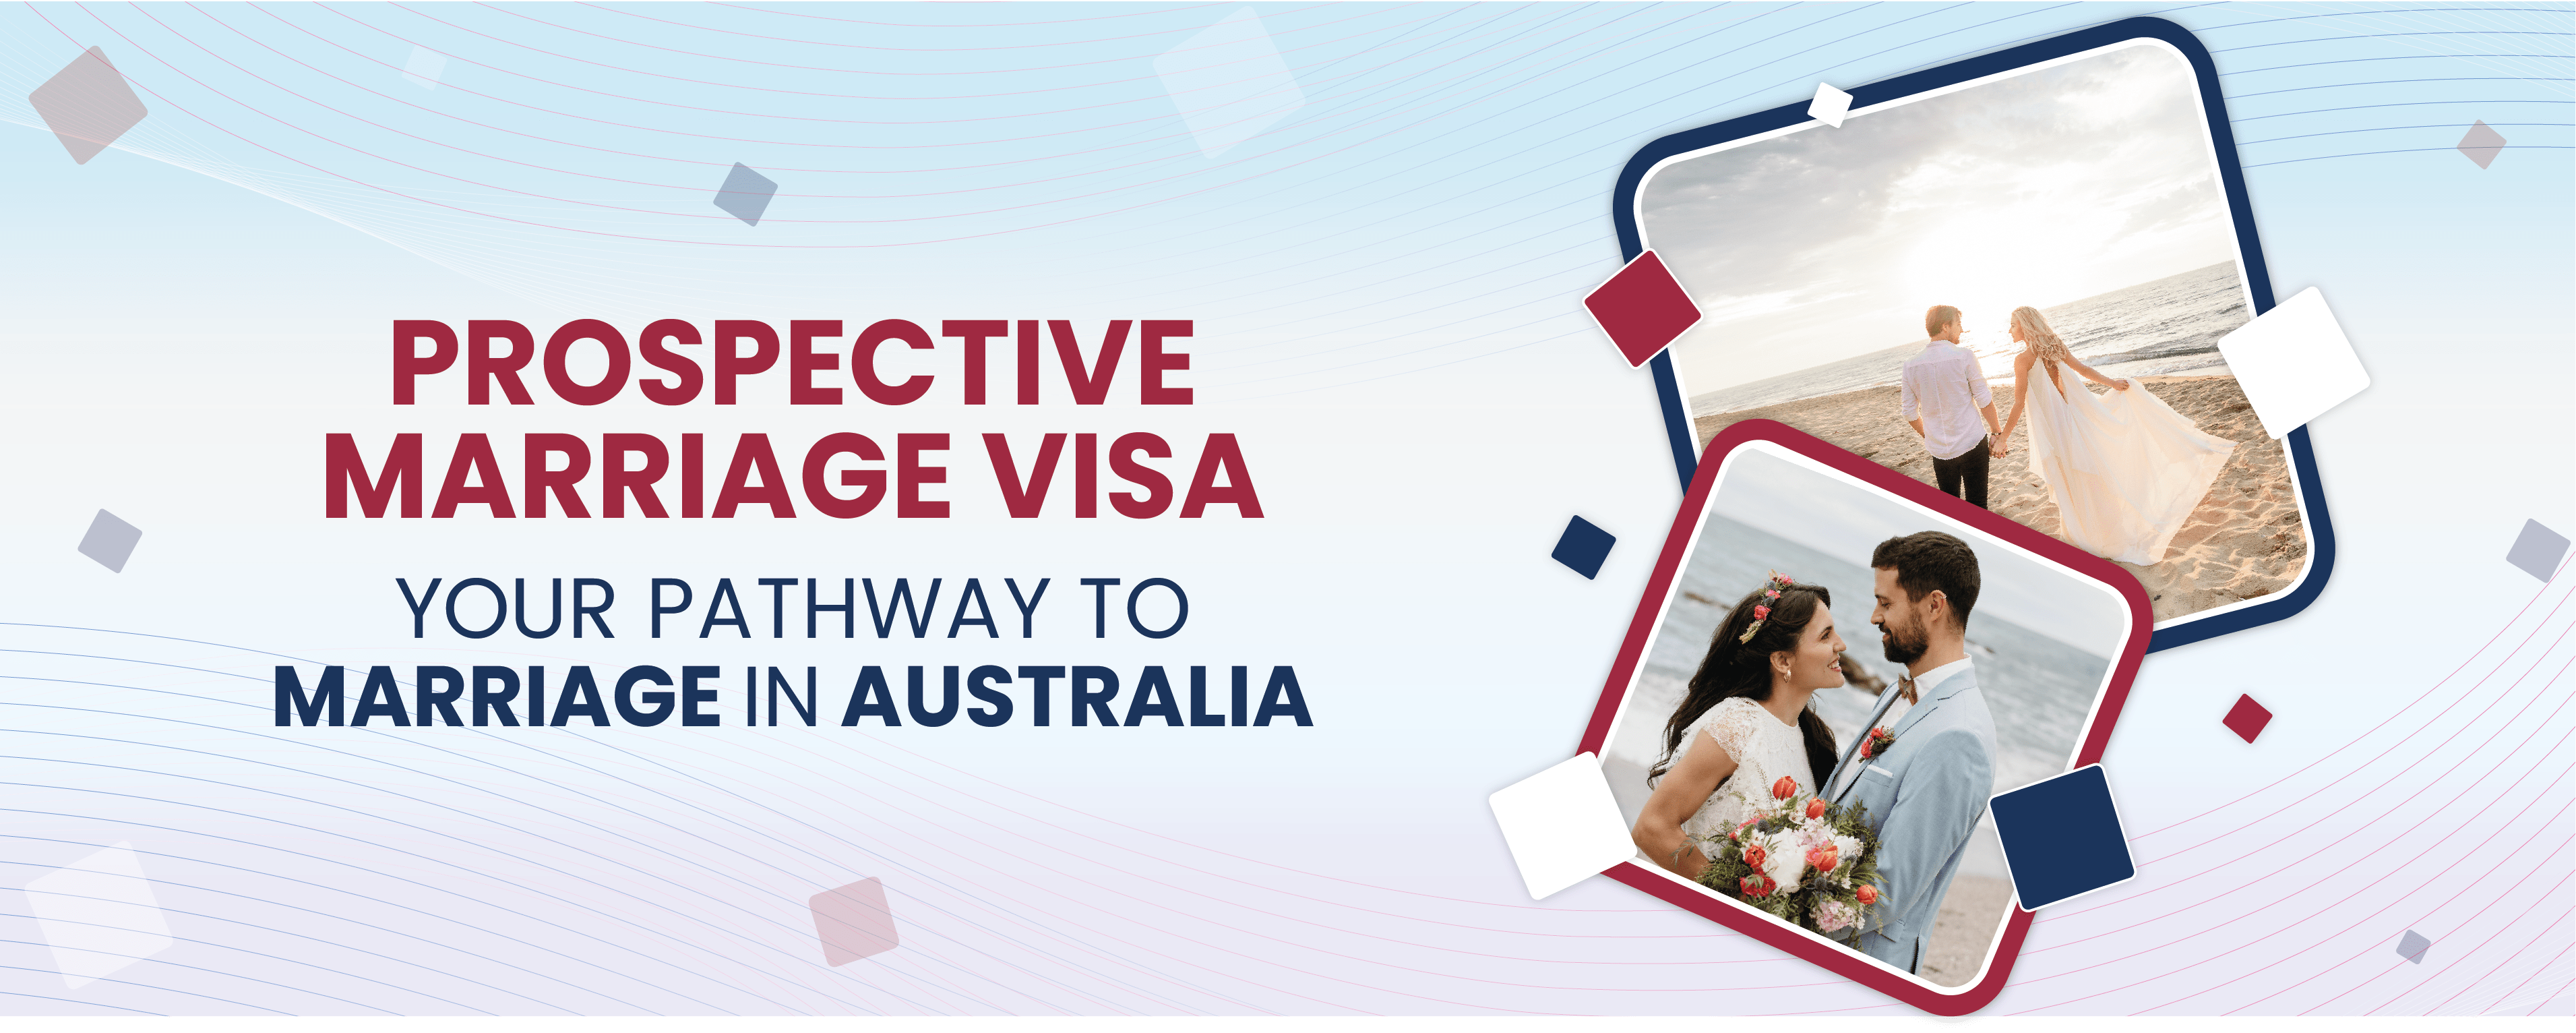 Prospective Marriage Visa: Your Pathway to Marriage in Australia